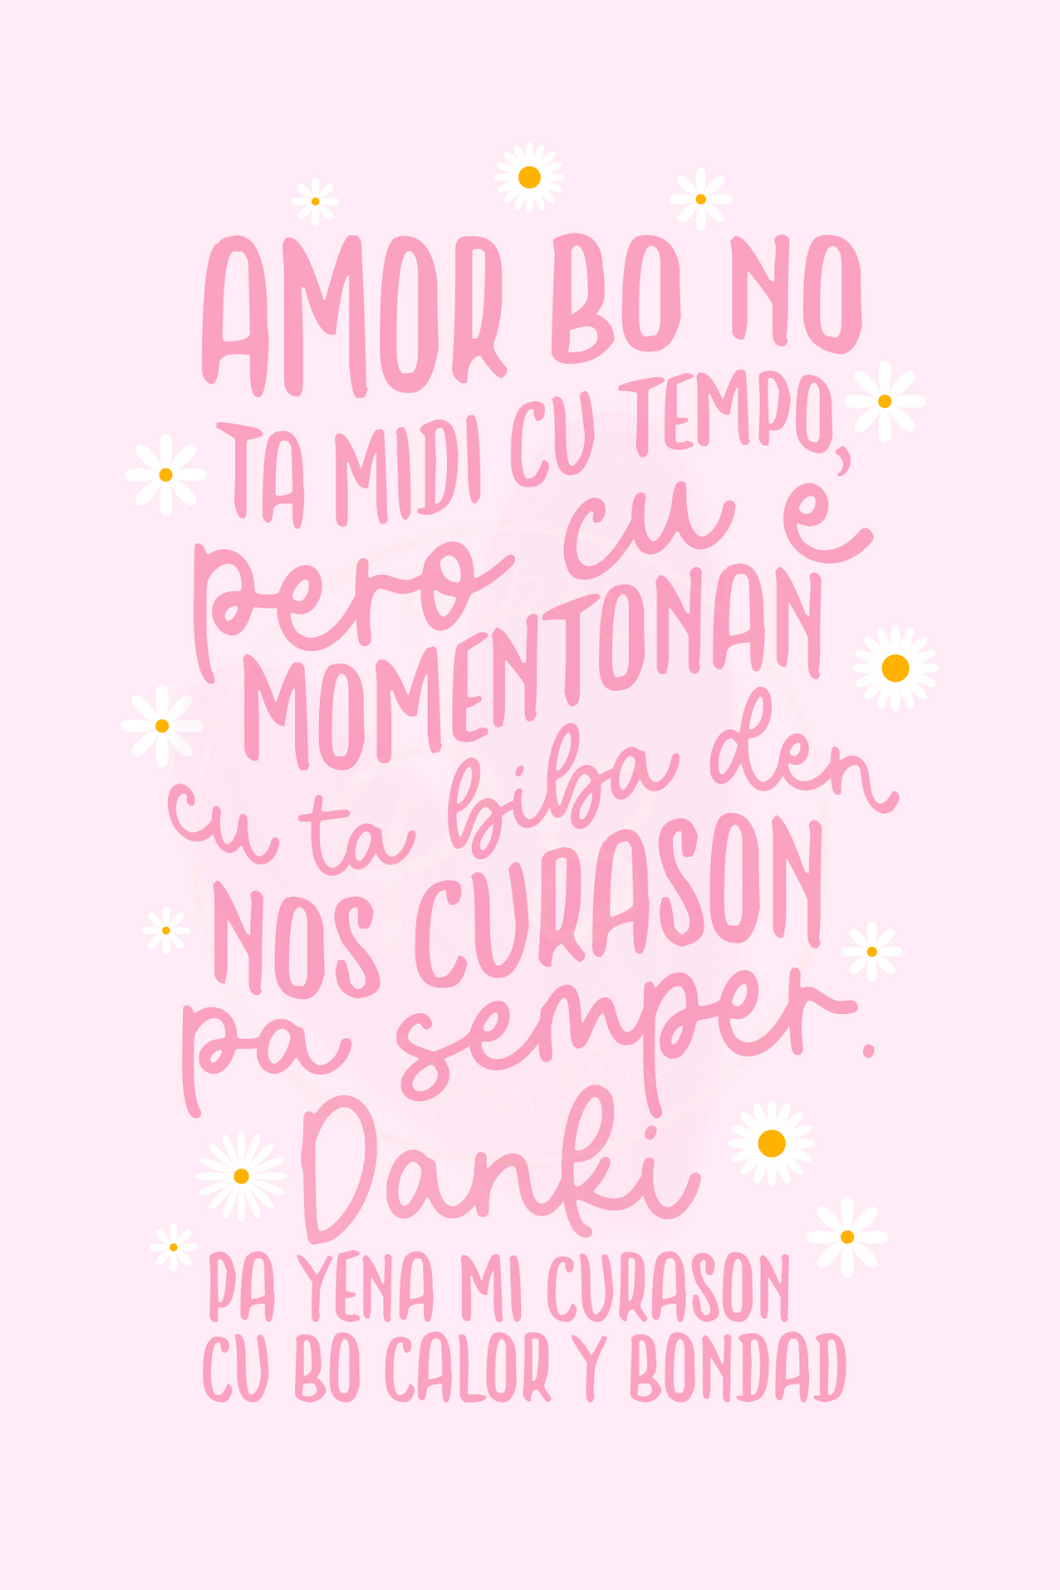 Yena Mi Curason Mother's Day Greeting Card in Papiamento